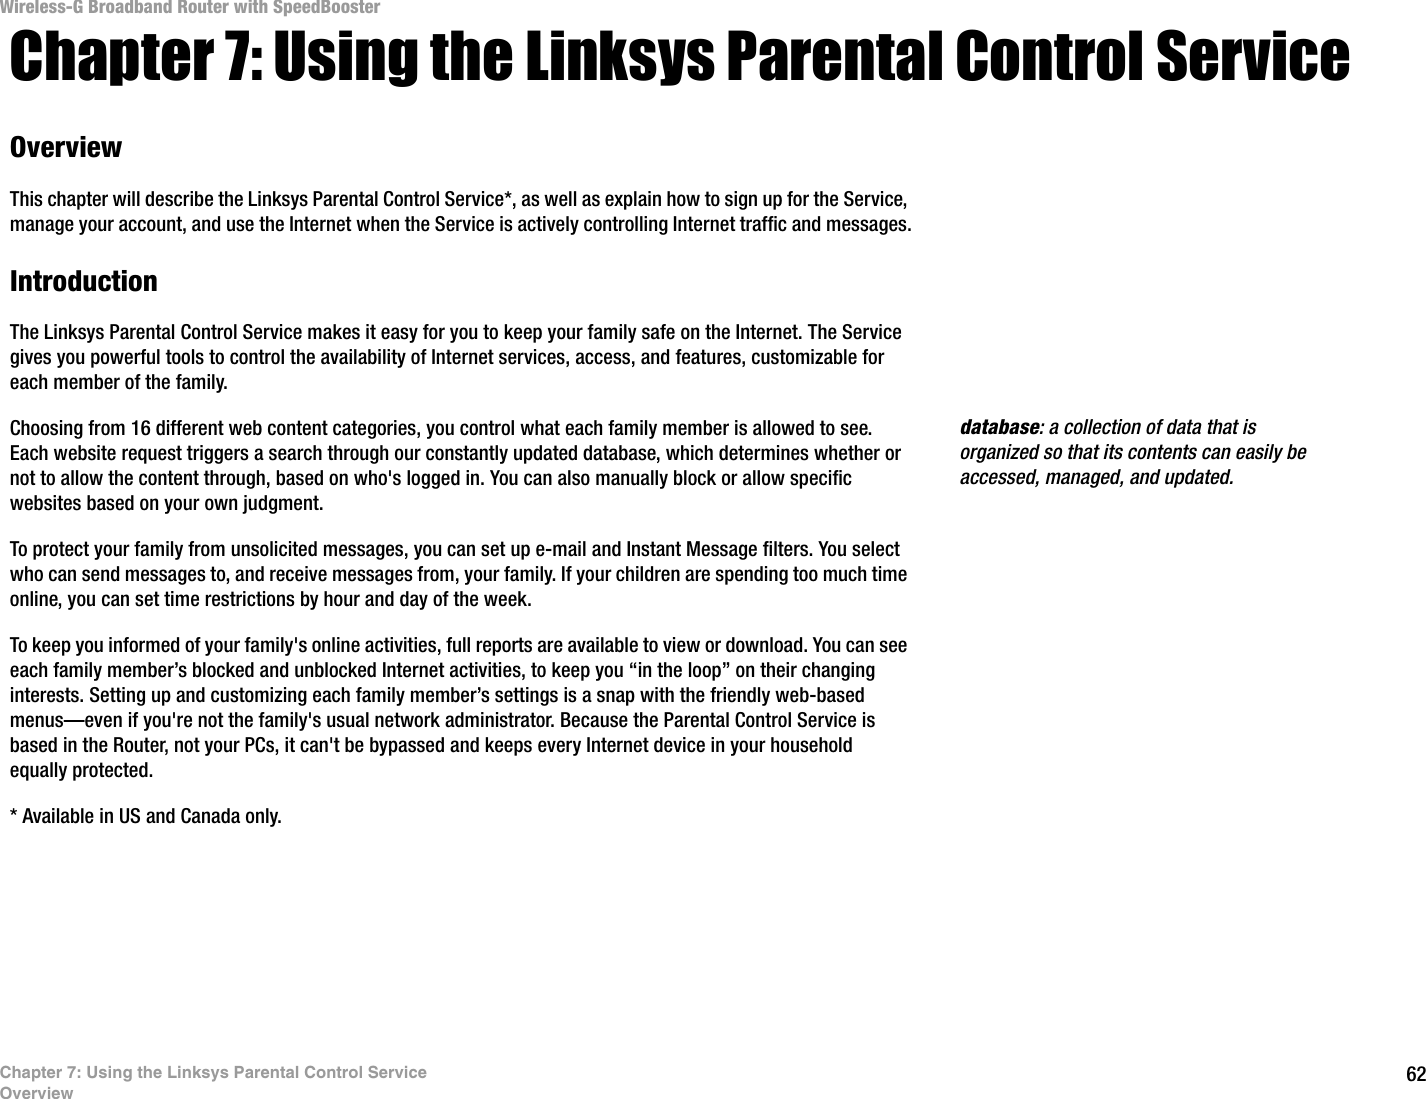 62Chapter 7: Using the Linksys Parental Control ServiceOverviewWireless-G Broadband Router with SpeedBoosterChapter 7: Using the Linksys Parental Control ServiceOverviewThis chapter will describe the Linksys Parental Control Service*, as well as explain how to sign up for the Service, manage your account, and use the Internet when the Service is actively controlling Internet traffic and messages.IntroductionThe Linksys Parental Control Service makes it easy for you to keep your family safe on the Internet. The Service gives you powerful tools to control the availability of Internet services, access, and features, customizable for each member of the family.Choosing from 16 different web content categories, you control what each family member is allowed to see.  Each website request triggers a search through our constantly updated database, which determines whether or not to allow the content through, based on who&apos;s logged in. You can also manually block or allow specific websites based on your own judgment.To protect your family from unsolicited messages, you can set up e-mail and Instant Message filters. You select who can send messages to, and receive messages from, your family. If your children are spending too much time online, you can set time restrictions by hour and day of the week.To keep you informed of your family&apos;s online activities, full reports are available to view or download. You can see each family member’s blocked and unblocked Internet activities, to keep you “in the loop” on their changing interests. Setting up and customizing each family member’s settings is a snap with the friendly web-based menus—even if you&apos;re not the family&apos;s usual network administrator. Because the Parental Control Service is based in the Router, not your PCs, it can&apos;t be bypassed and keeps every Internet device in your household equally protected.* Available in US and Canada only. database: a collection of data that is organized so that its contents can easily be accessed, managed, and updated.